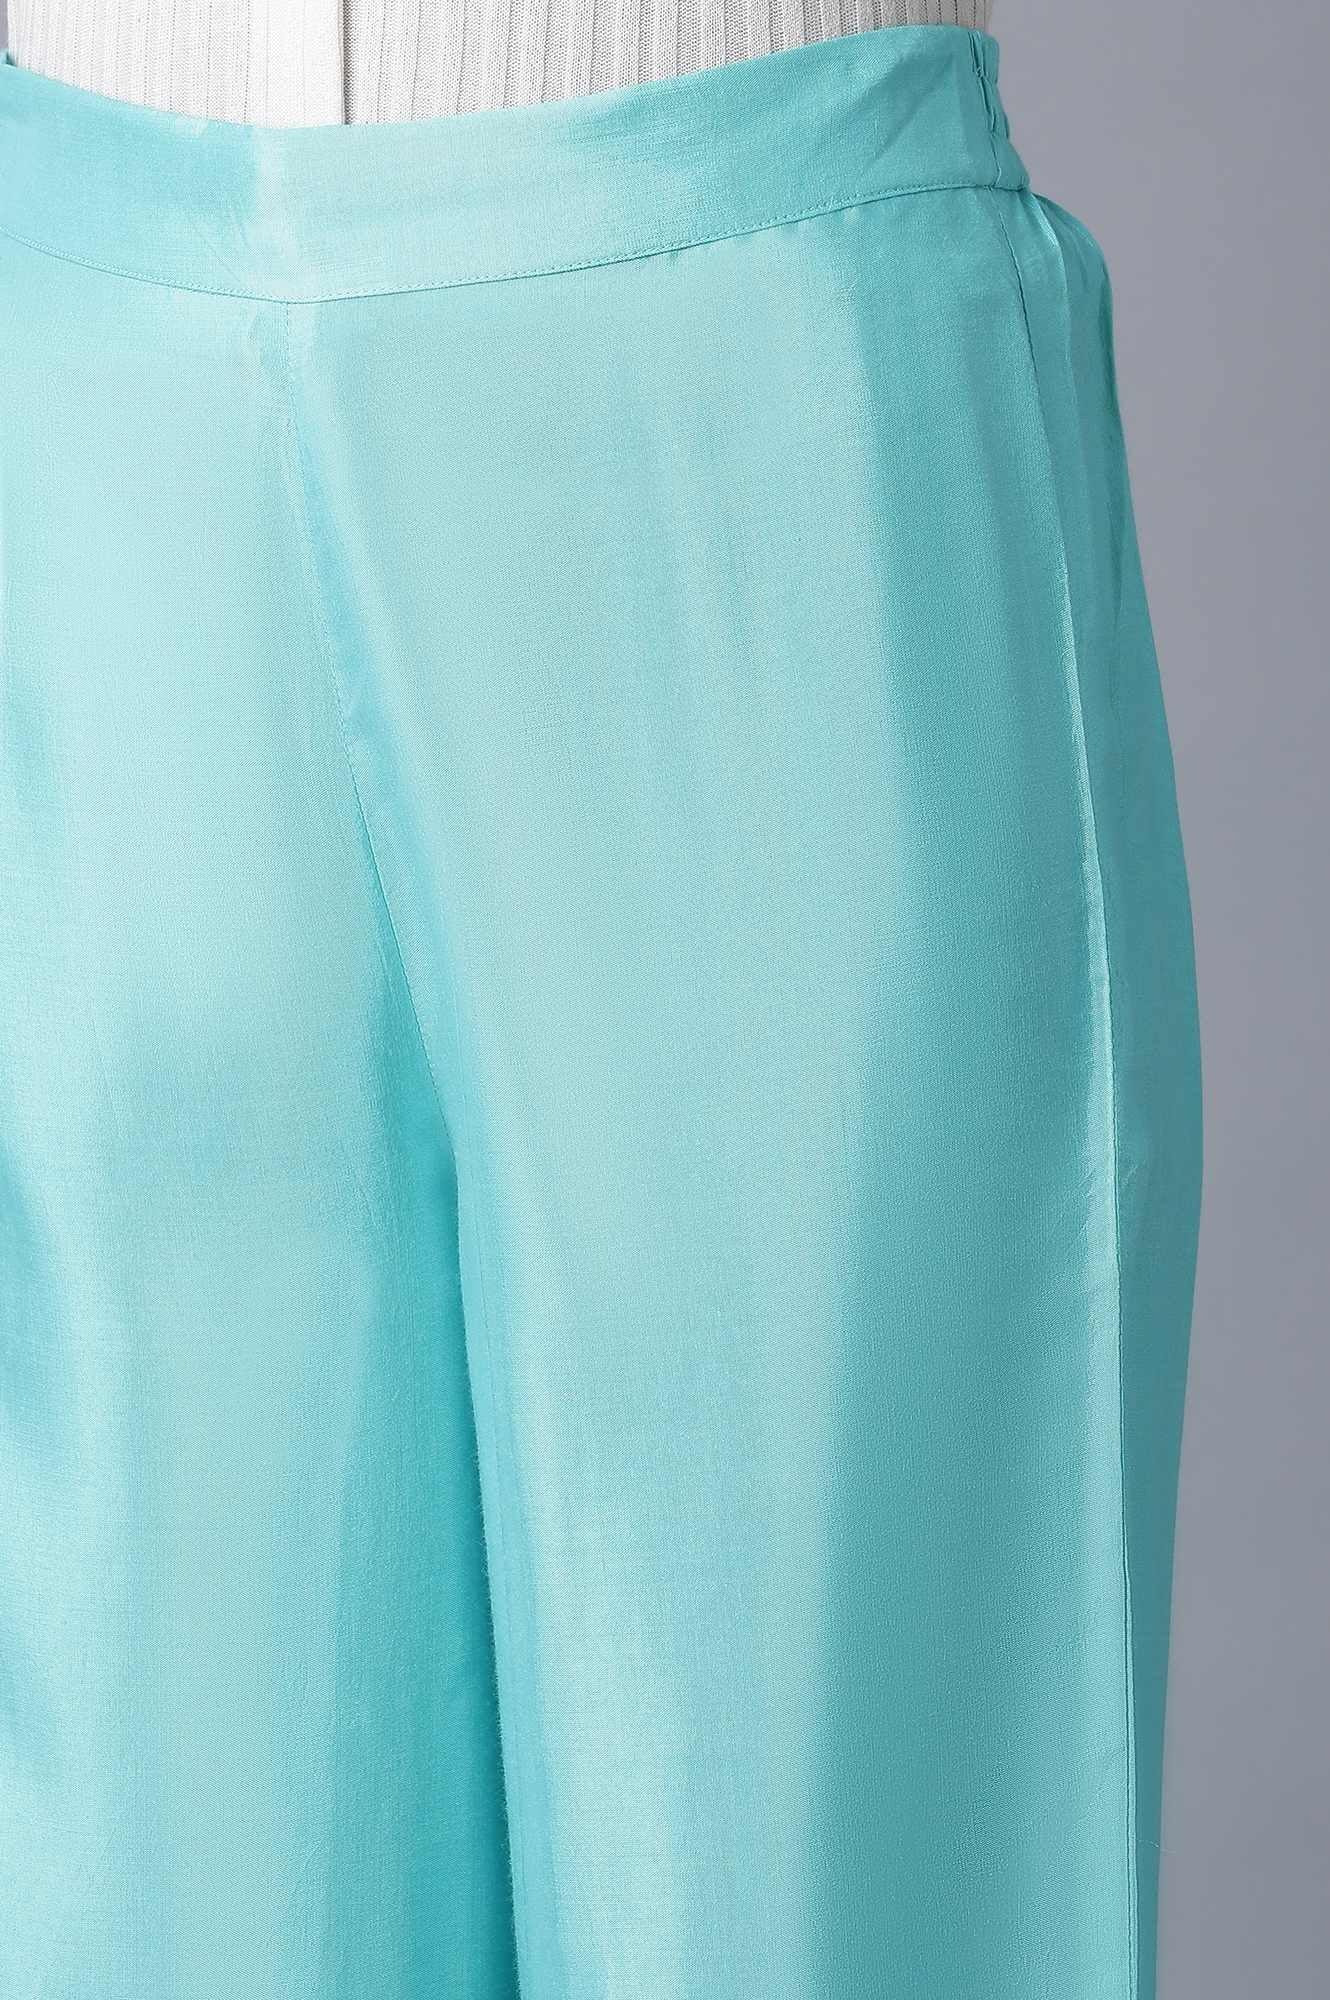 Turquoise Parallel Pants - wforwoman